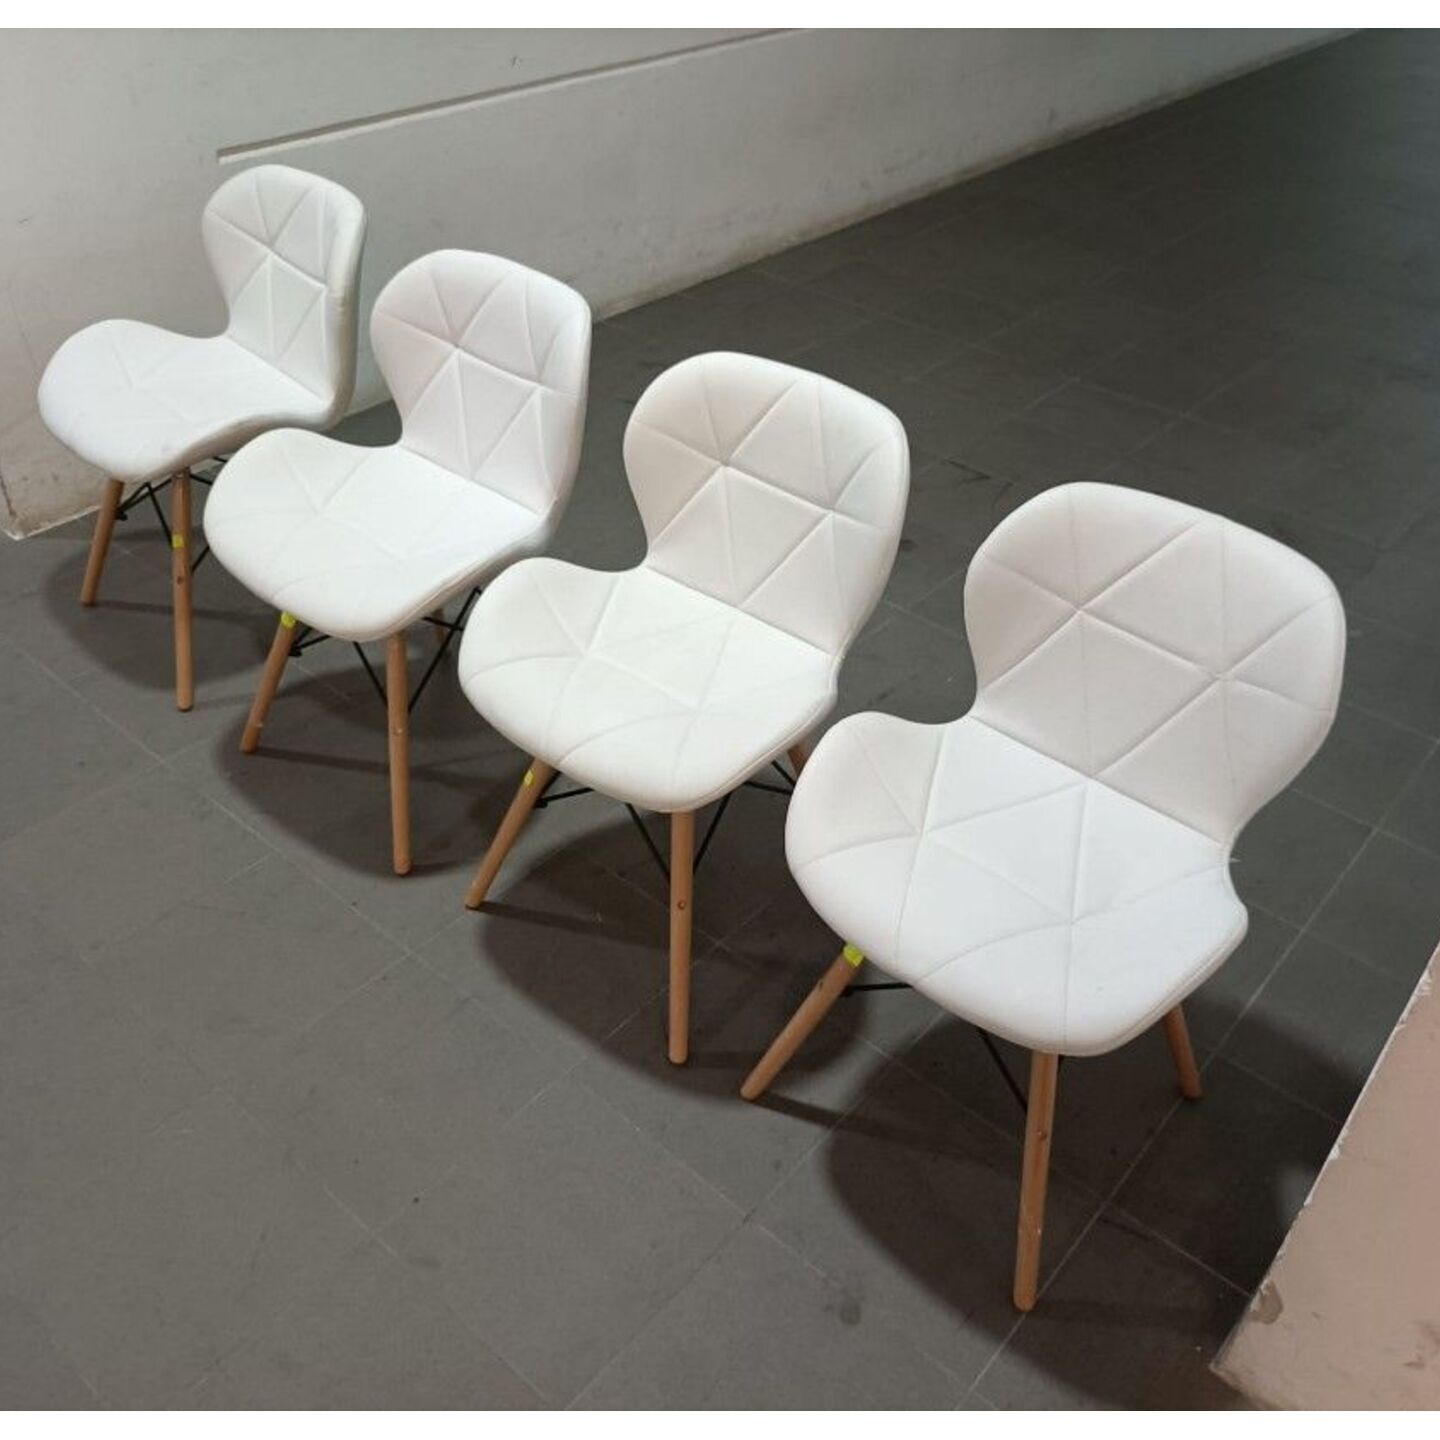 4 x KYOCHI Chairs in WHITE